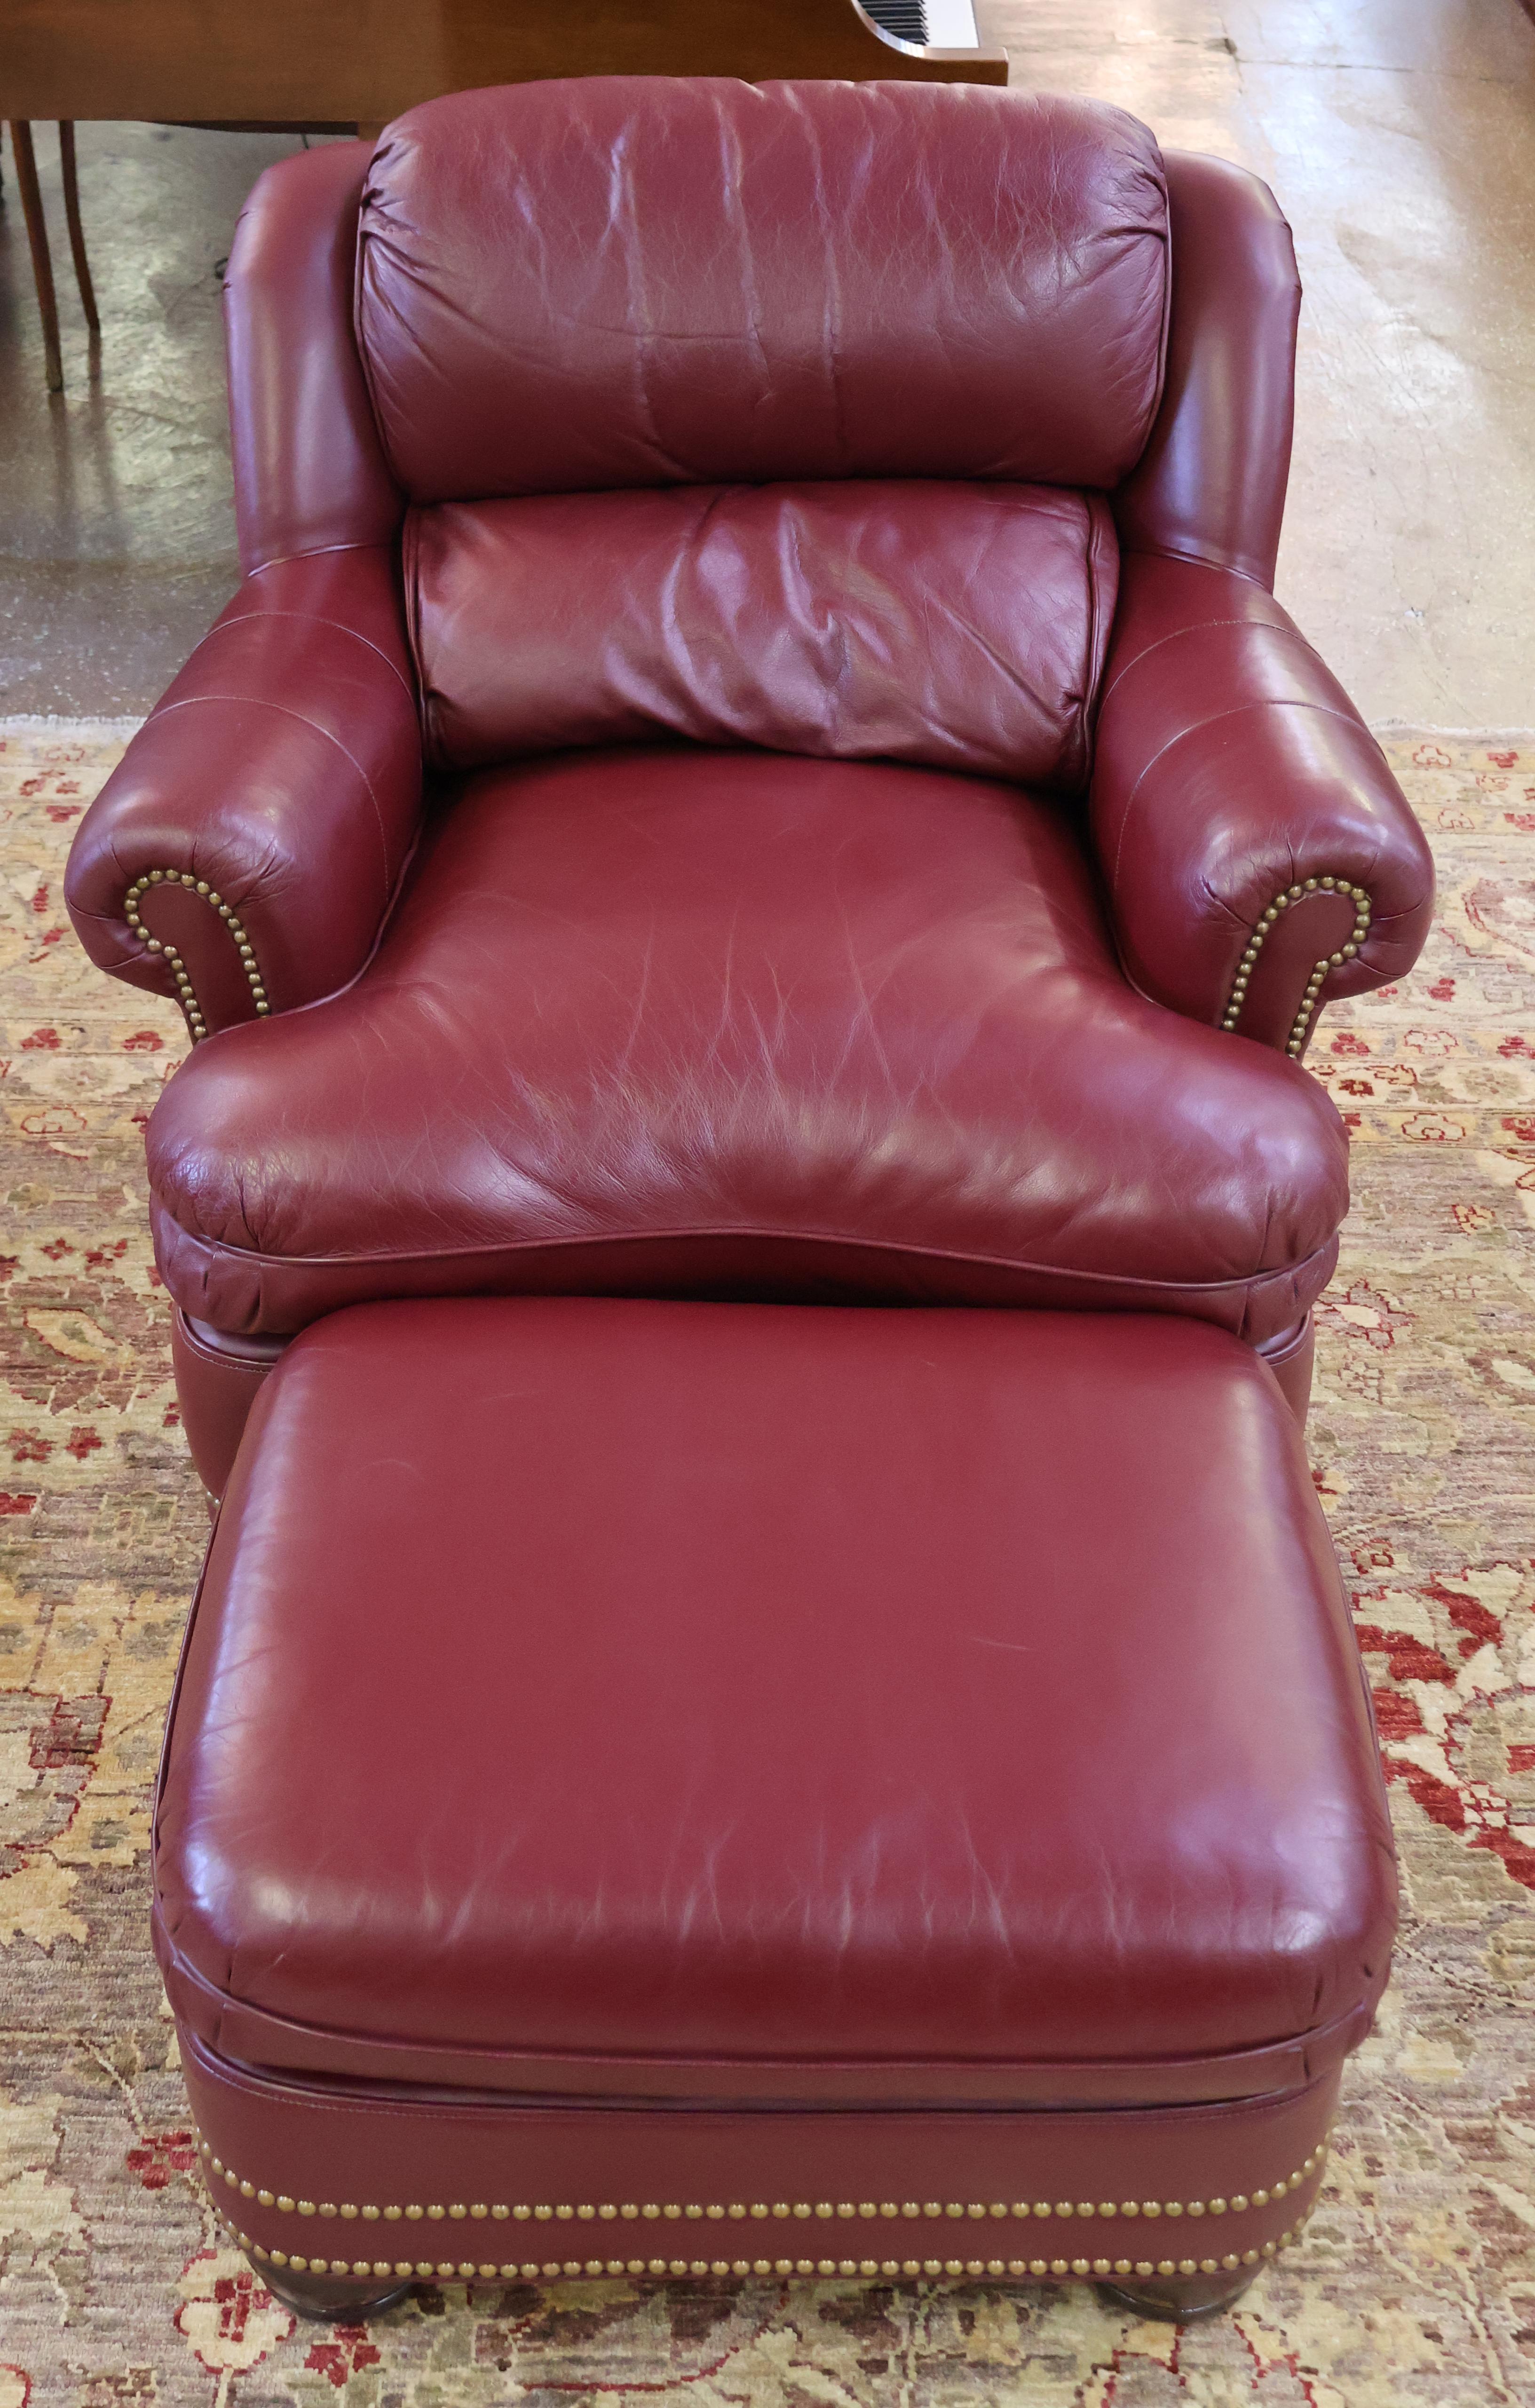 ​Hanock and Moore Austin Burgundy Leather Lounge Chair & Ottoman

Dimensions : Chair - 35